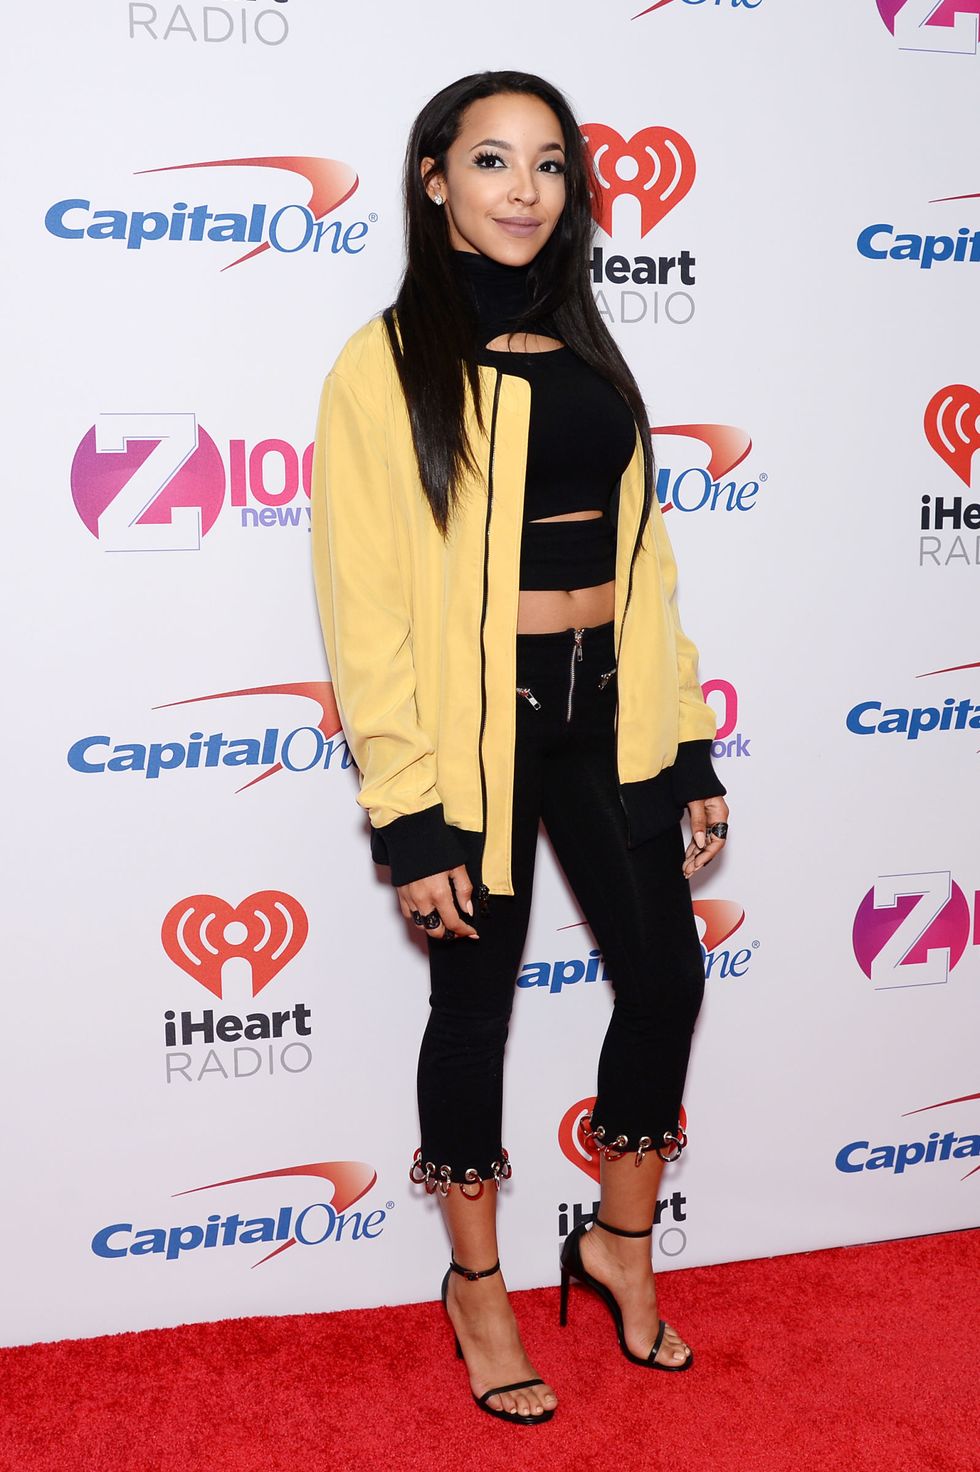 Celebrity outfits at the Jingle Ball 2015